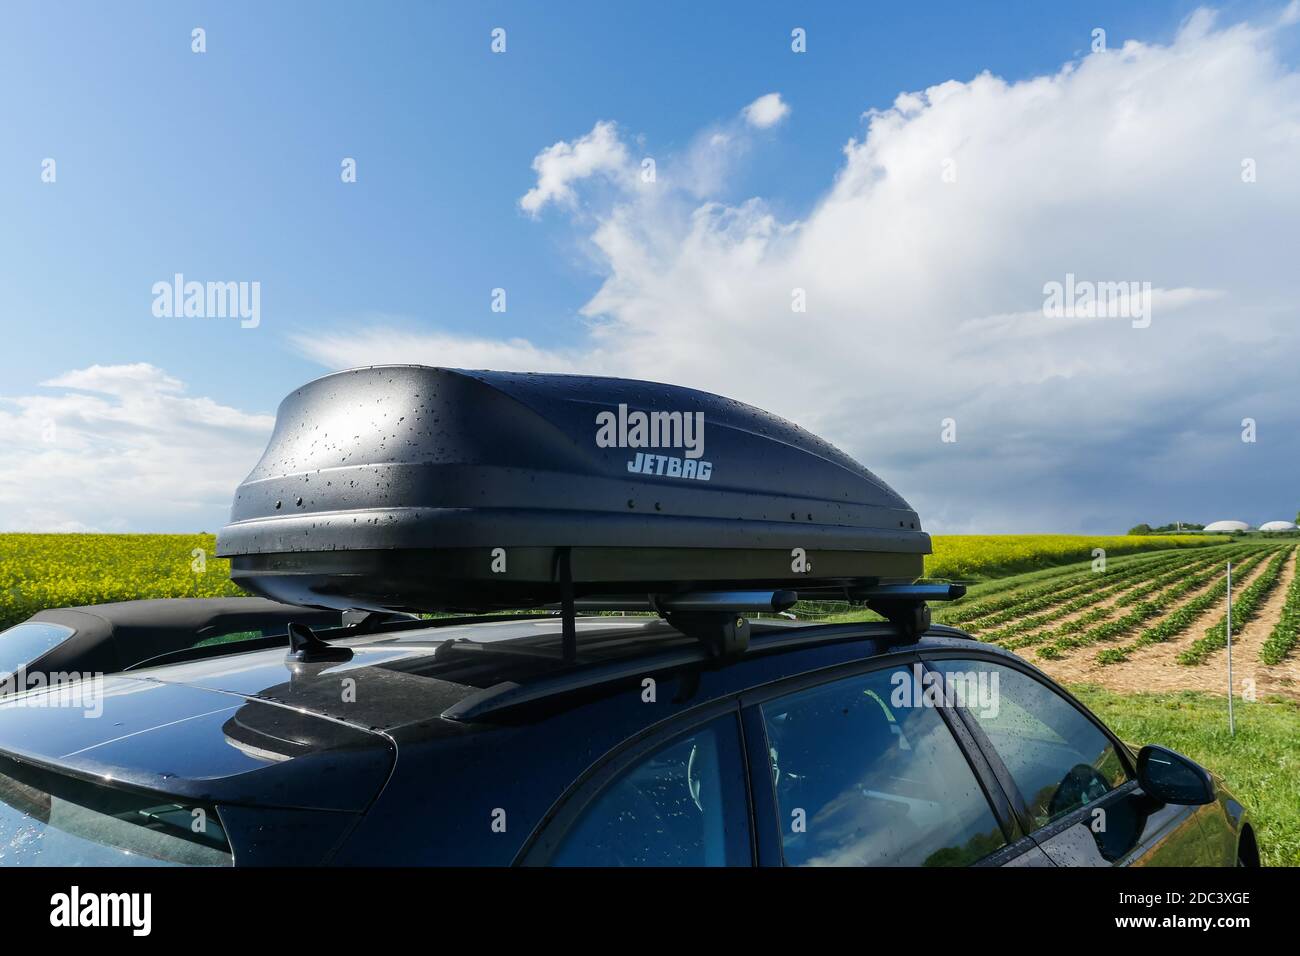 Jetbag car rooftop storage container box in agricultural field in sunny  outdoors Stock Photo - Alamy